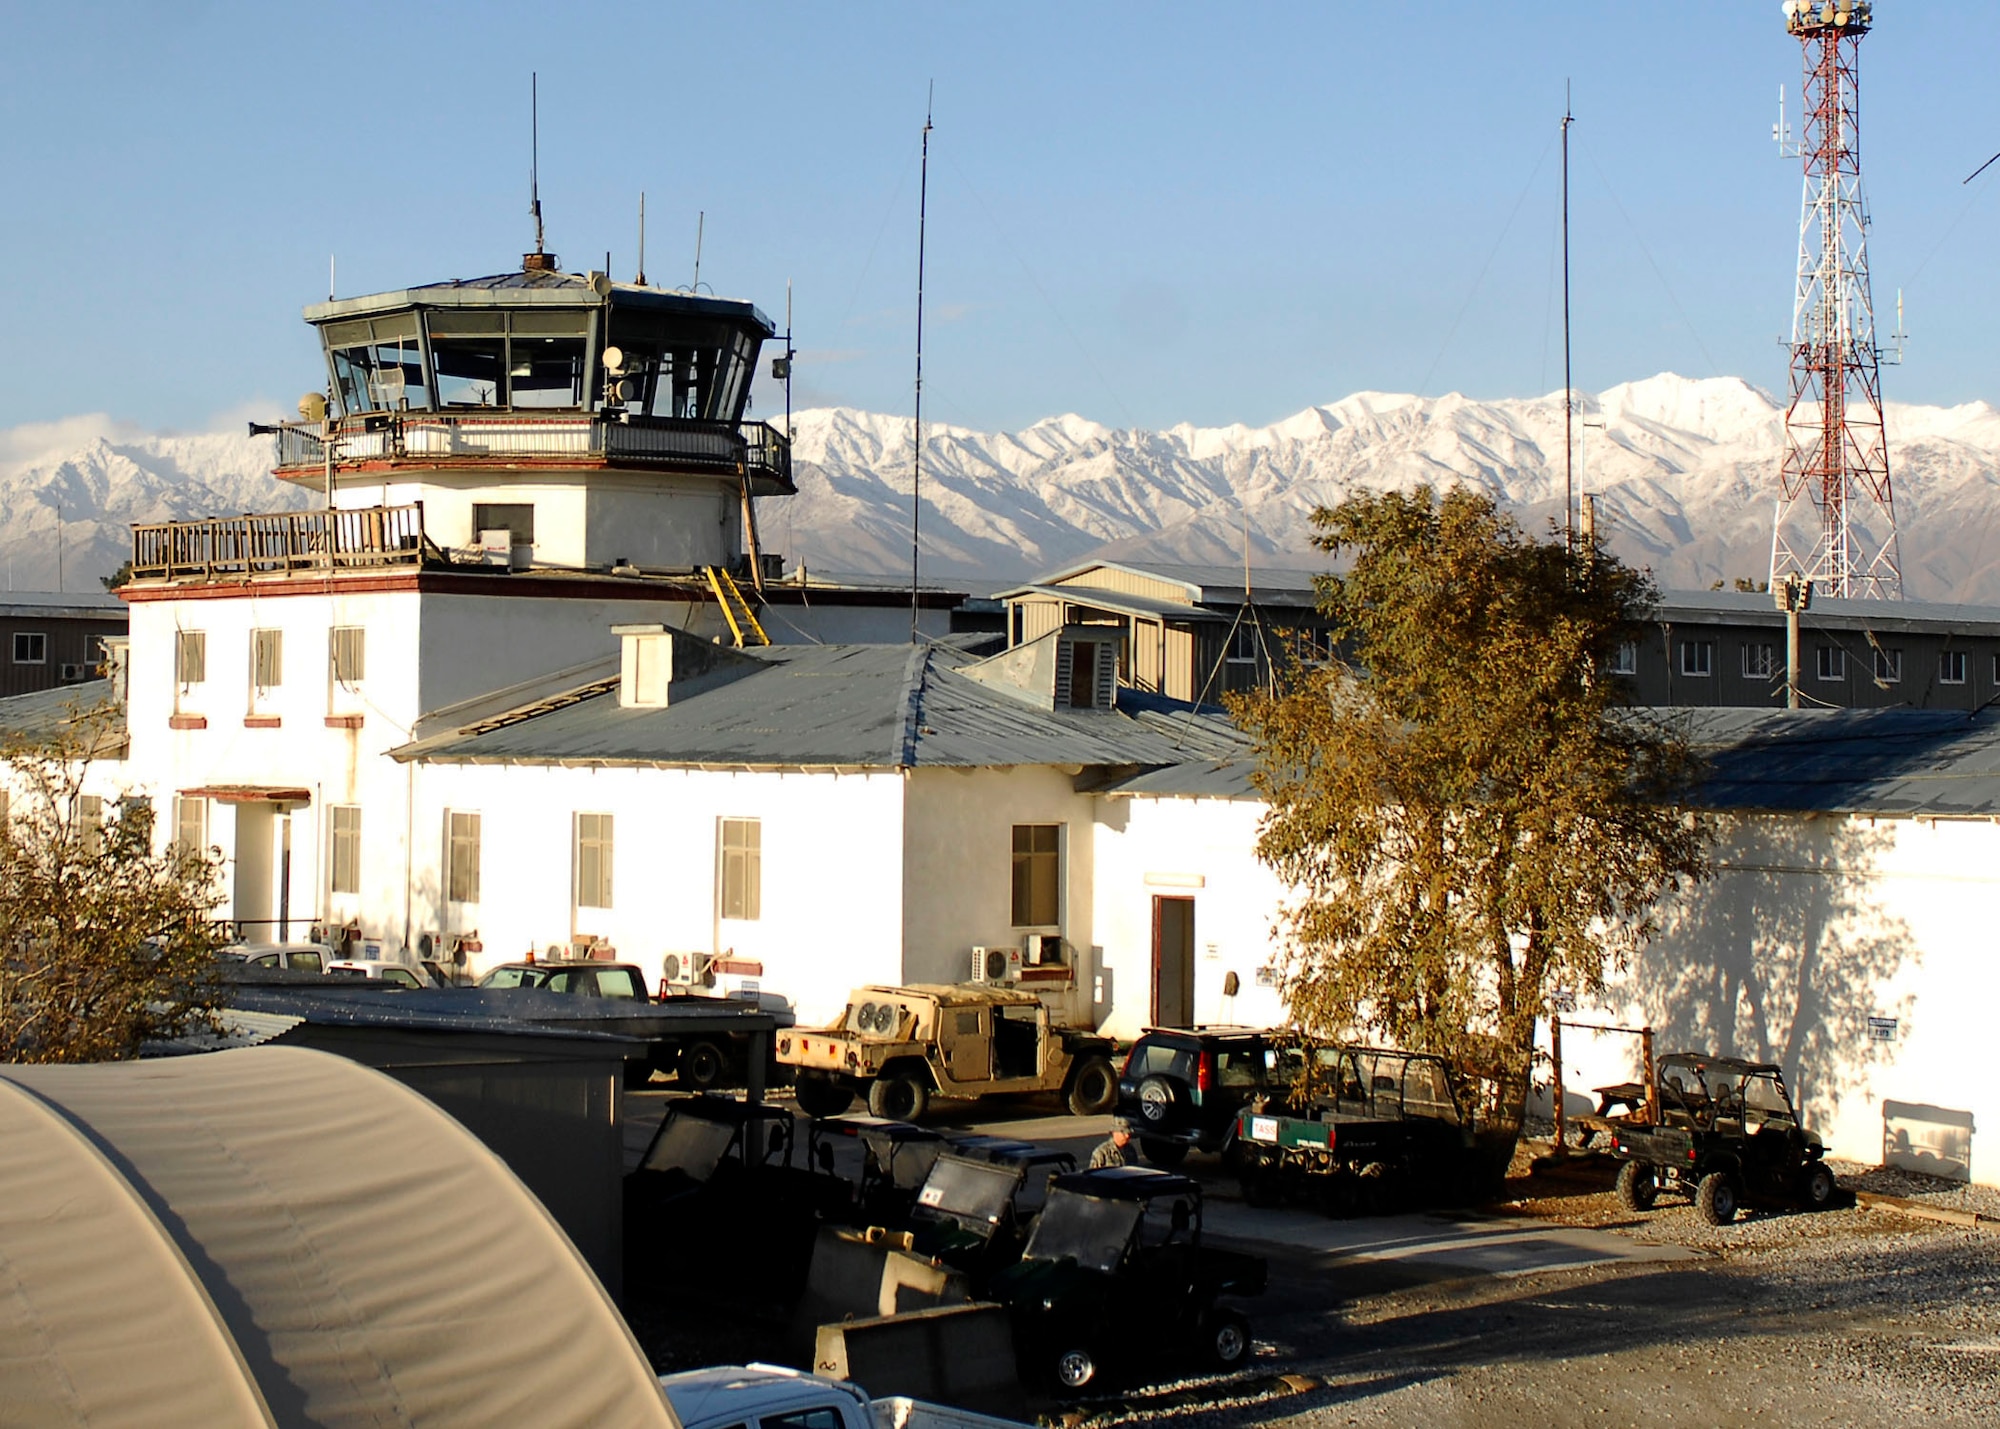 BAGRAM AIRFIELD, Afghanistan -- Beautiful mountains in Afghanistan are visible behind the old Russian Control Tower, known as the Crow?s Nest,   Nov. 9, 2009.  The Russian Control Tower was built in 1976 during the Soviet Union's occupation of the region.  Currently more than 5,000 Airmen are deployed to Bagram supporting Operation Enduring Freedom and NATO International Security Assistance Forces.  (U.S. Air Force photo/Senior Airman Felicia Juenke)